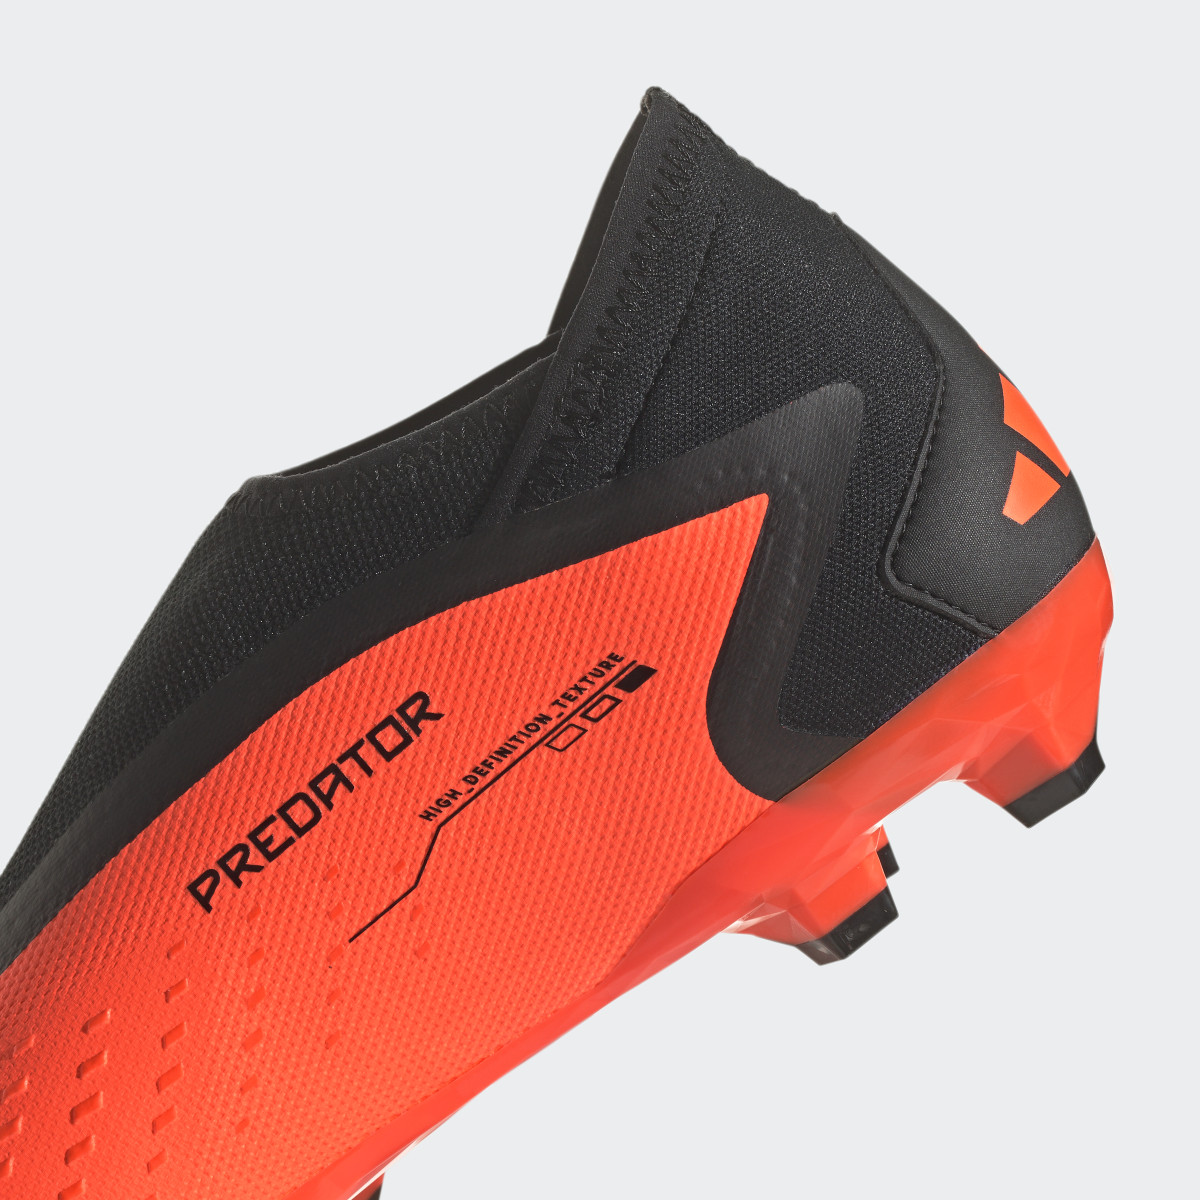 Adidas Predator Accuracy.3 Laceless Firm Ground Cleats. 10